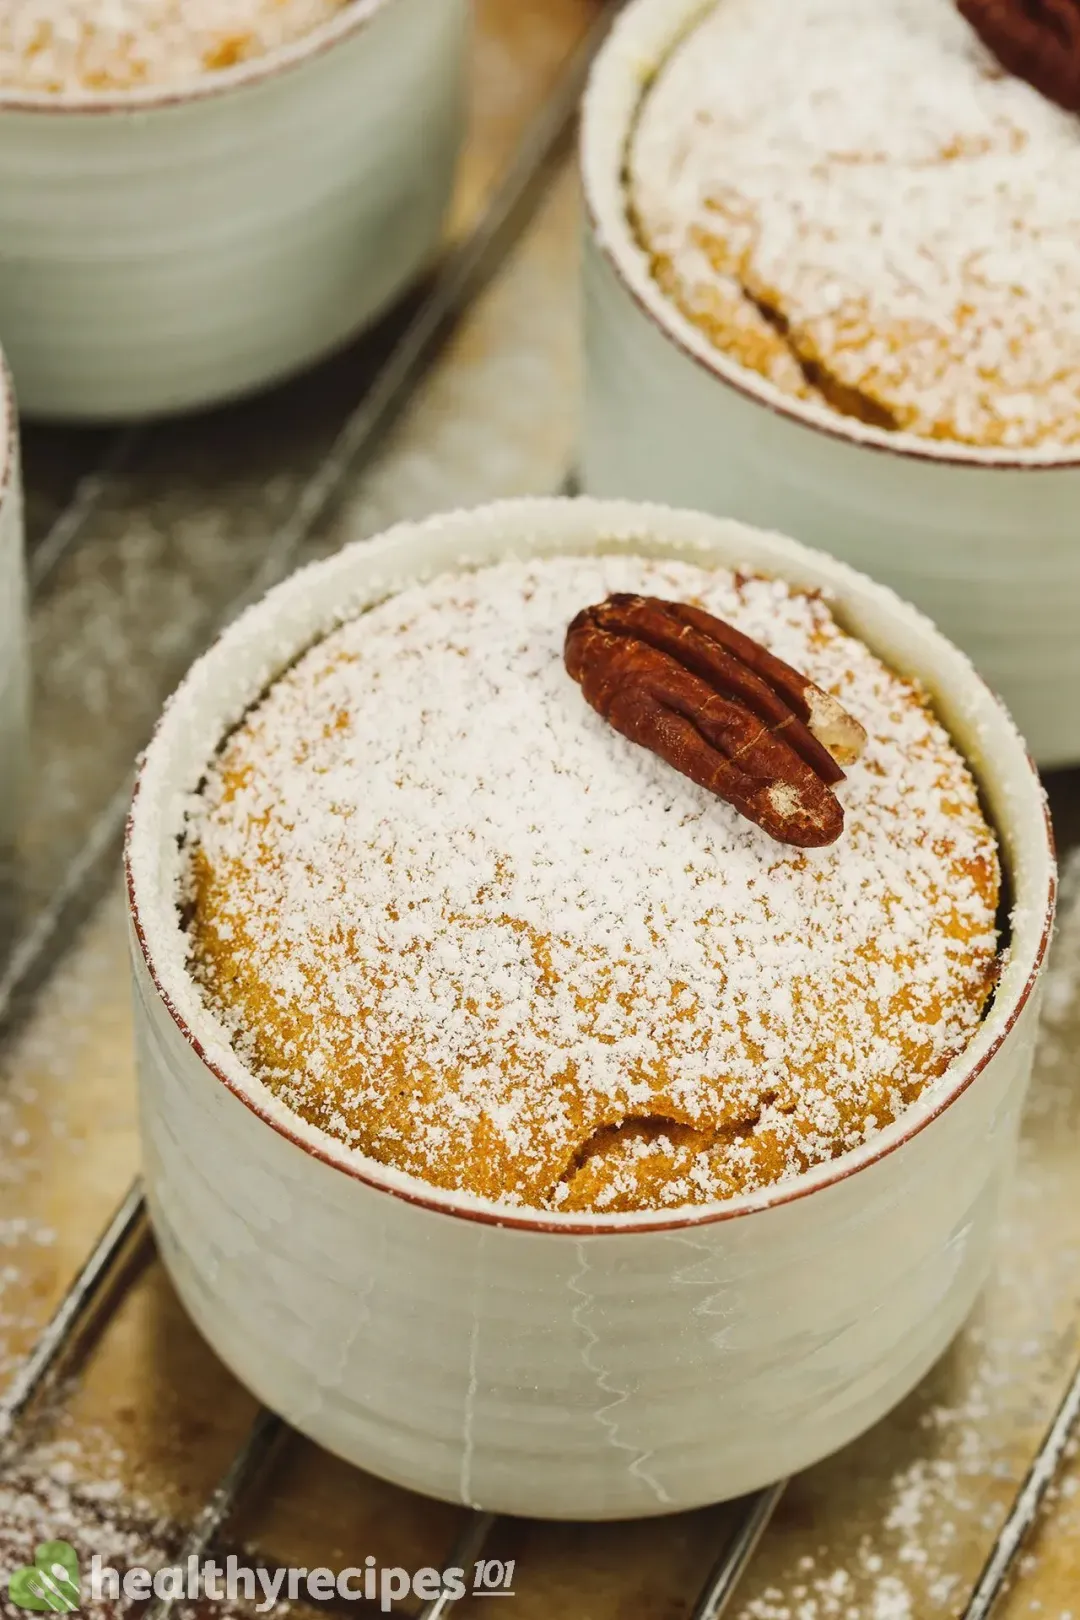 How Healthy is this Sweet Potato Souffle Recipe